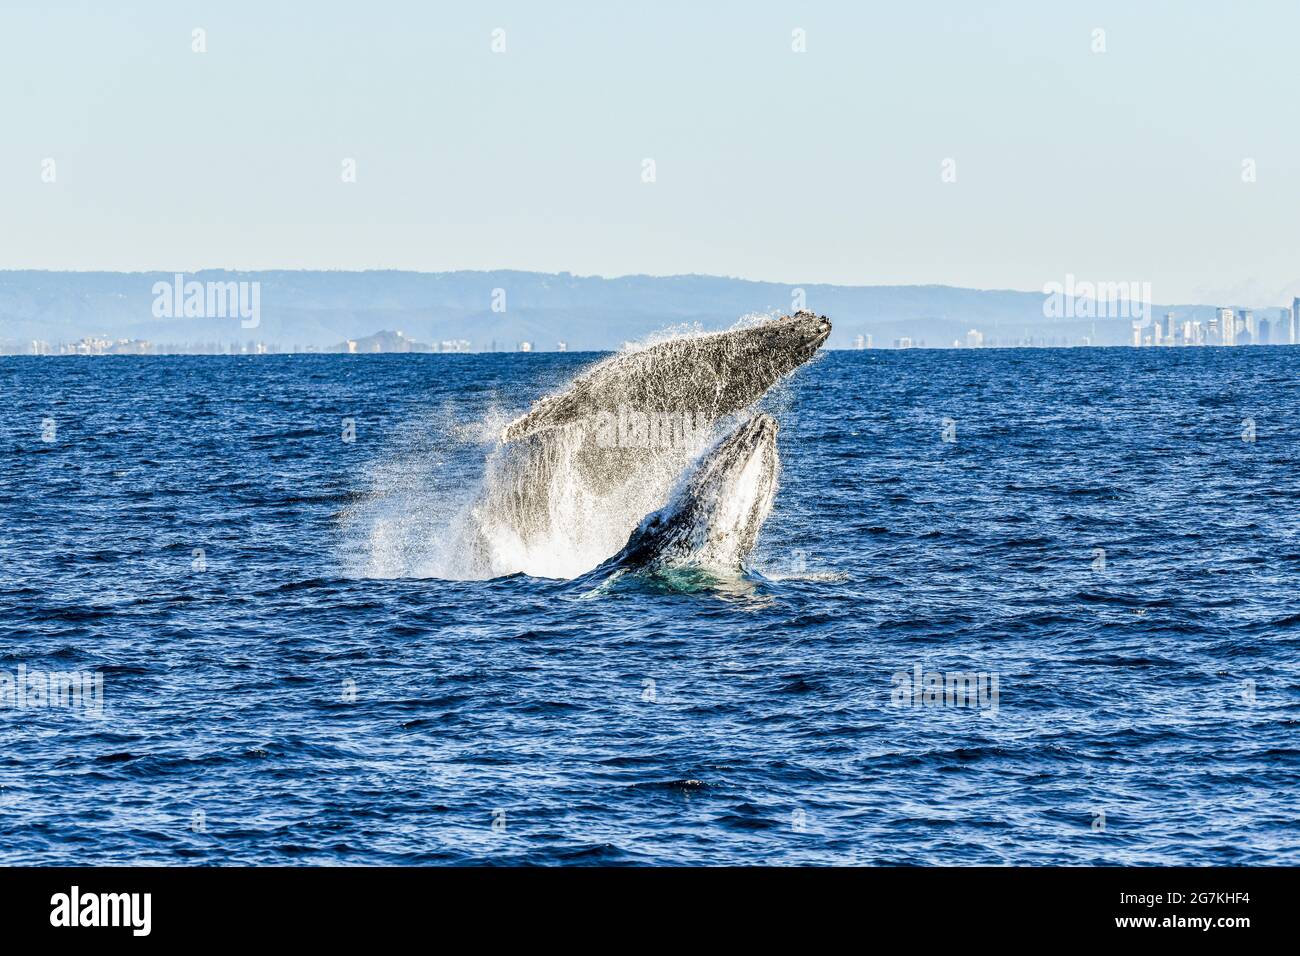 Two whales playing while breaching together in the ocean Stock Photo